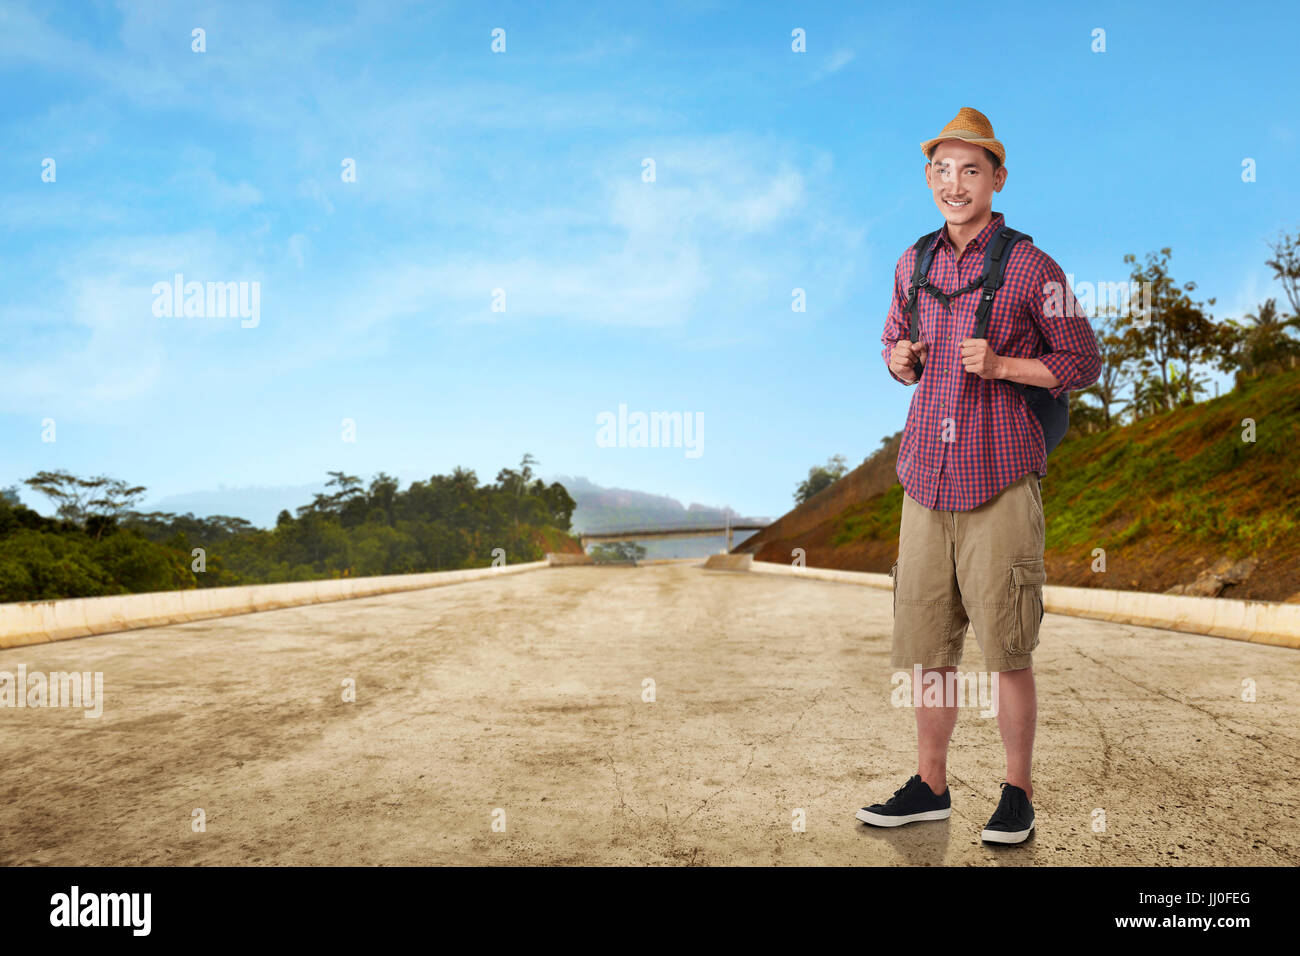 Young asian man traveling with hat and bag against landscape background Stock Photo